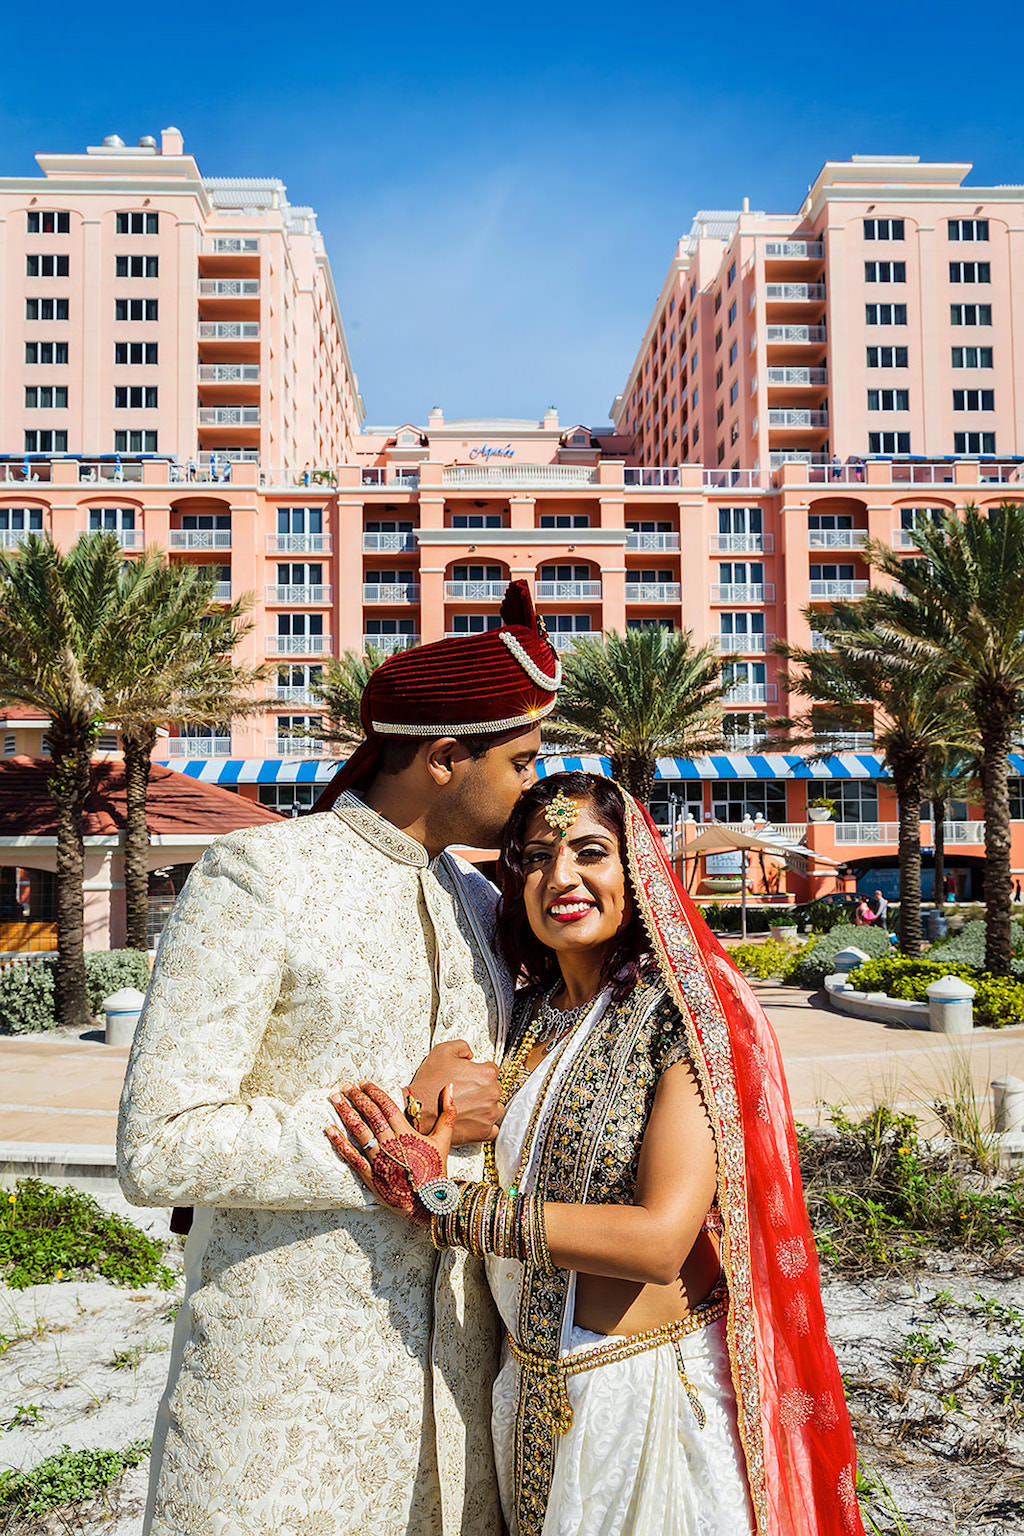 Florida Indian Hindu Bride and Groom Wedding Portrait, Bride in White and Gold Sari with Red and Gold Dupatta Veil, Groom in Traditional Sherwani and Red Turban | Clearwater Beach Wedding Waterfront Venue Hyatt Regency Clearwater | Hair and Makeup Destiny and Light Hair and Makeup Group